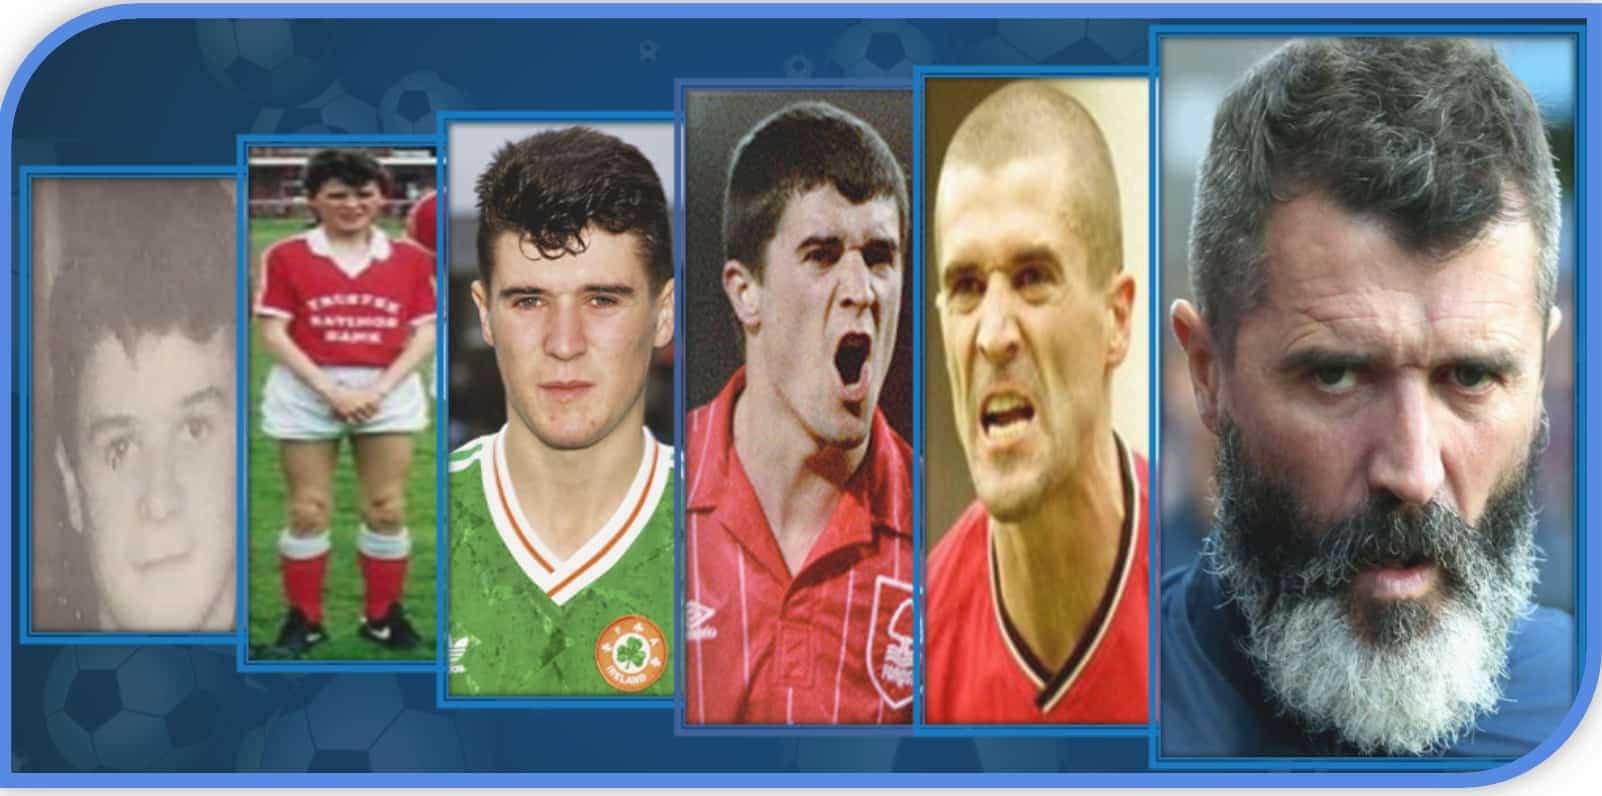 Roy Keane Biography Story. Behold the Football Legend's Early Life and Great Rise.